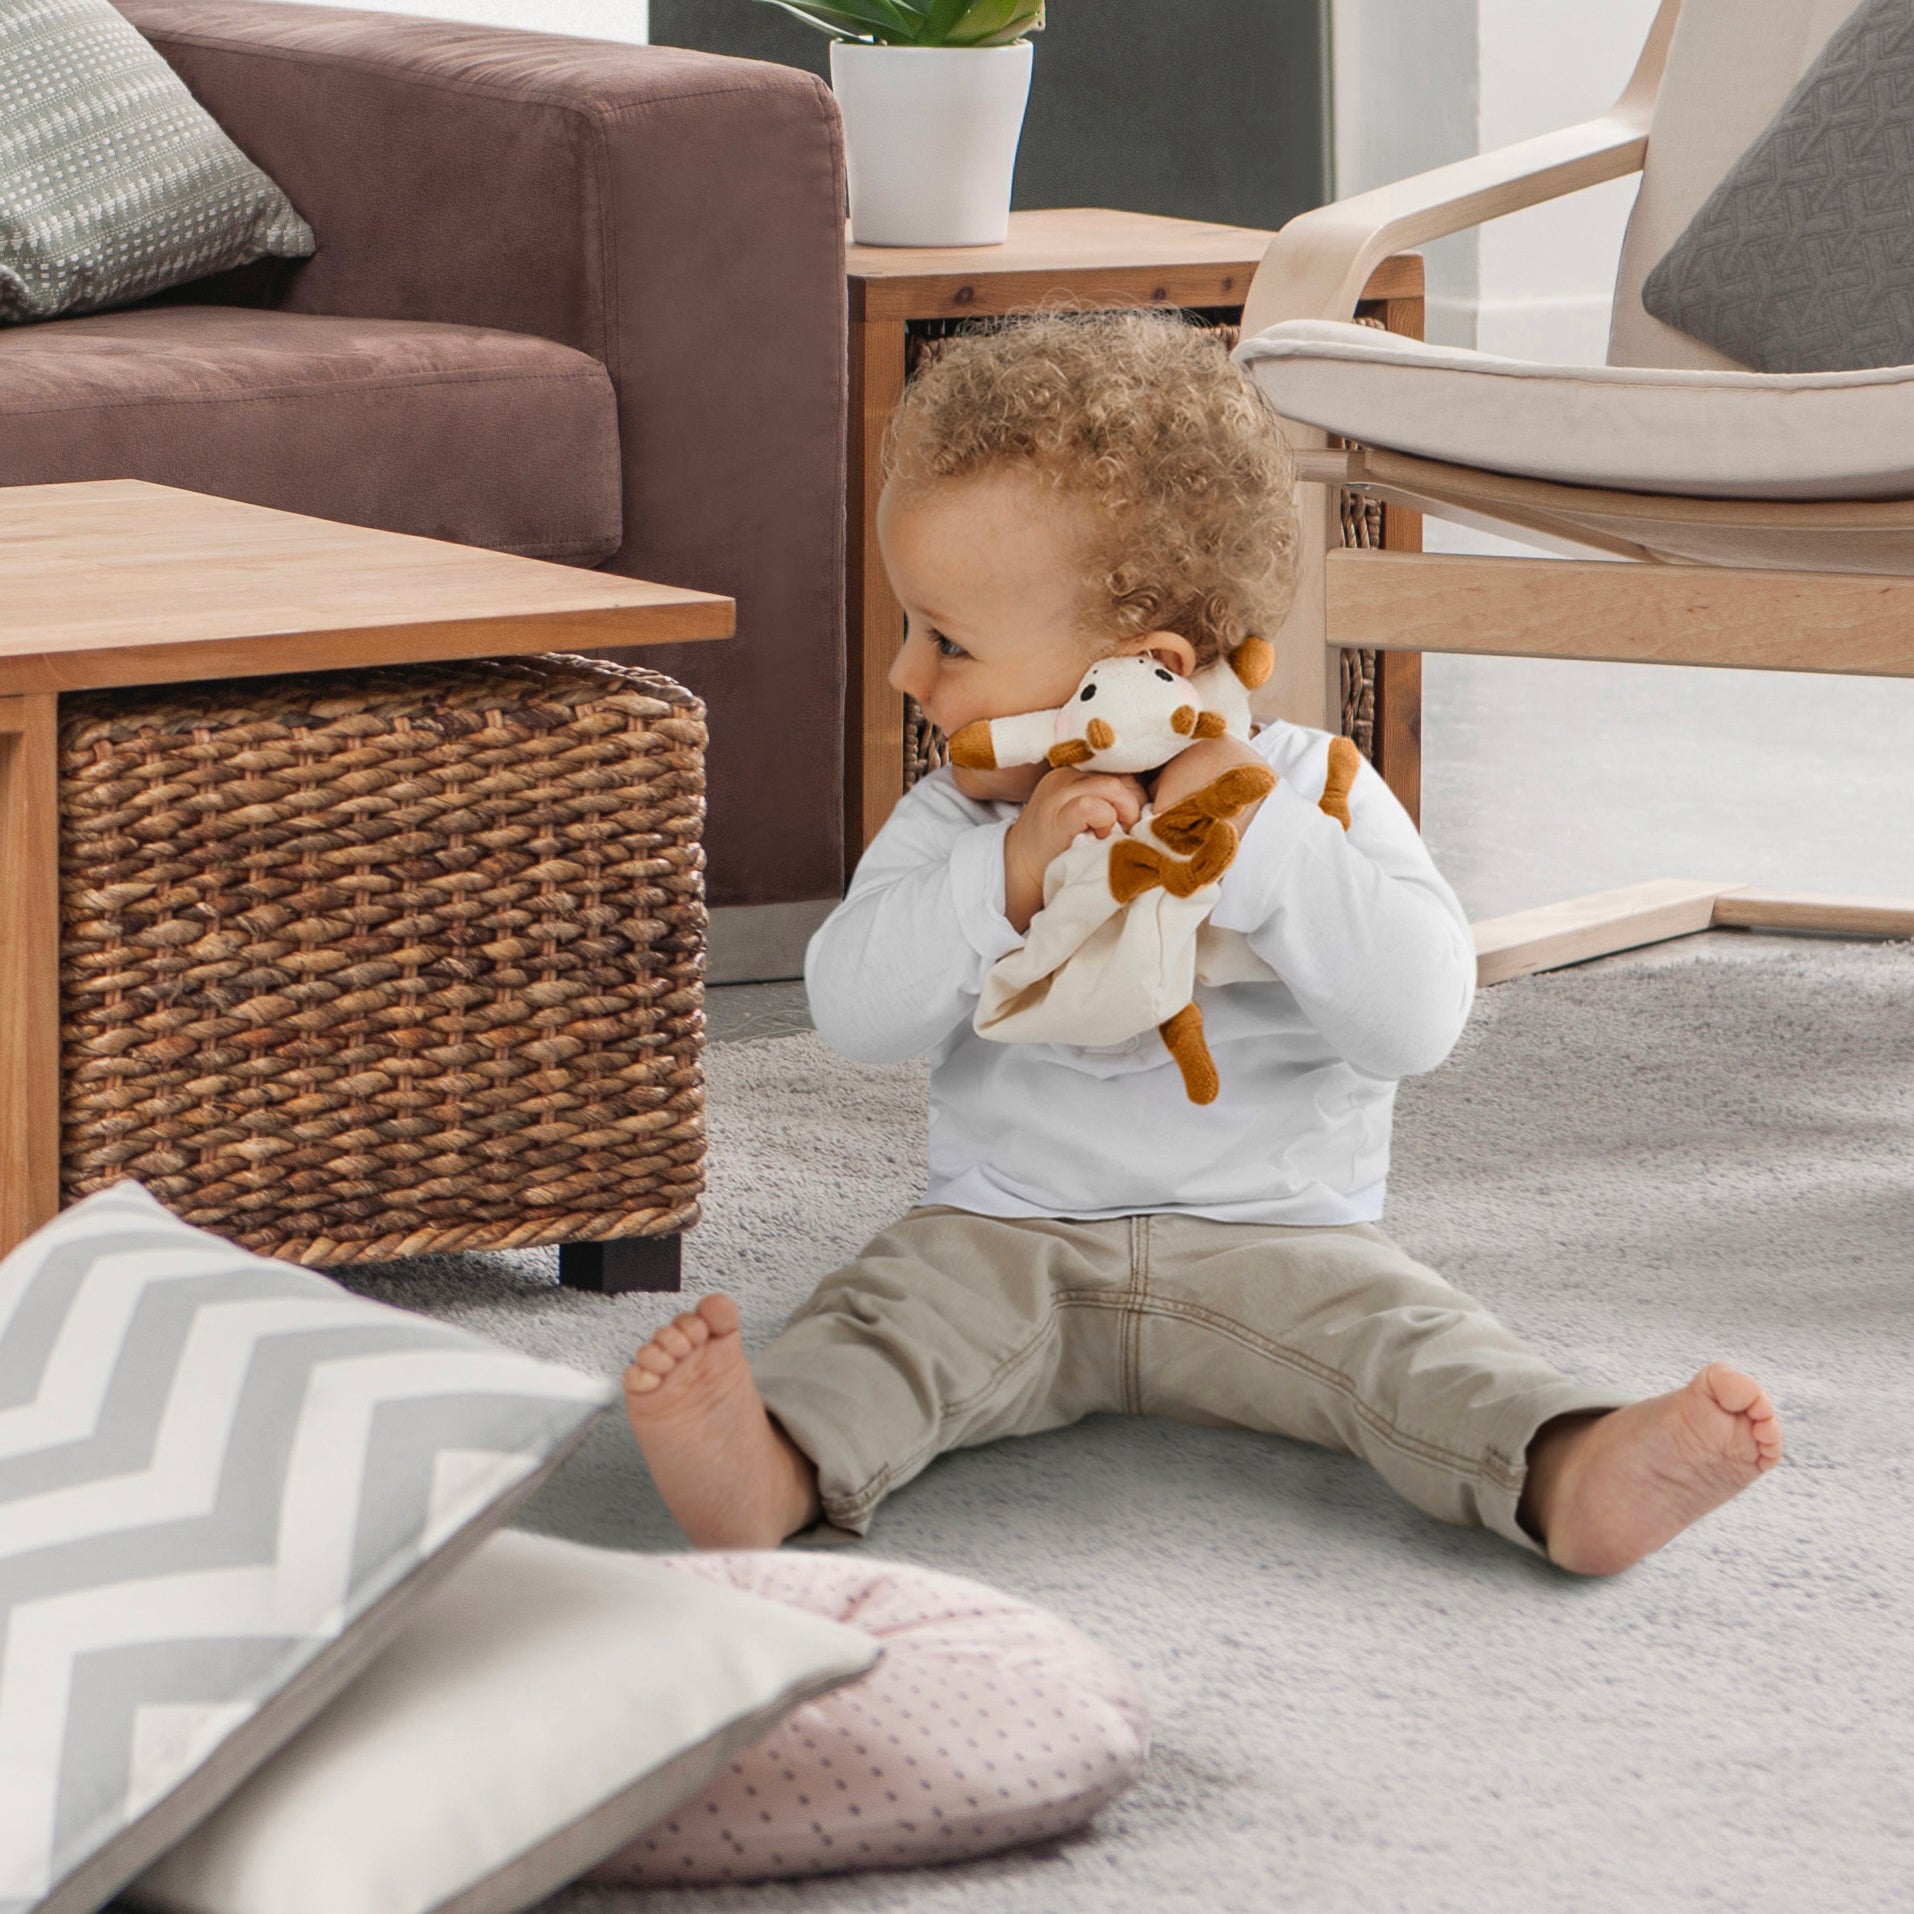 Sophie the Giraffe comforter with soother holder